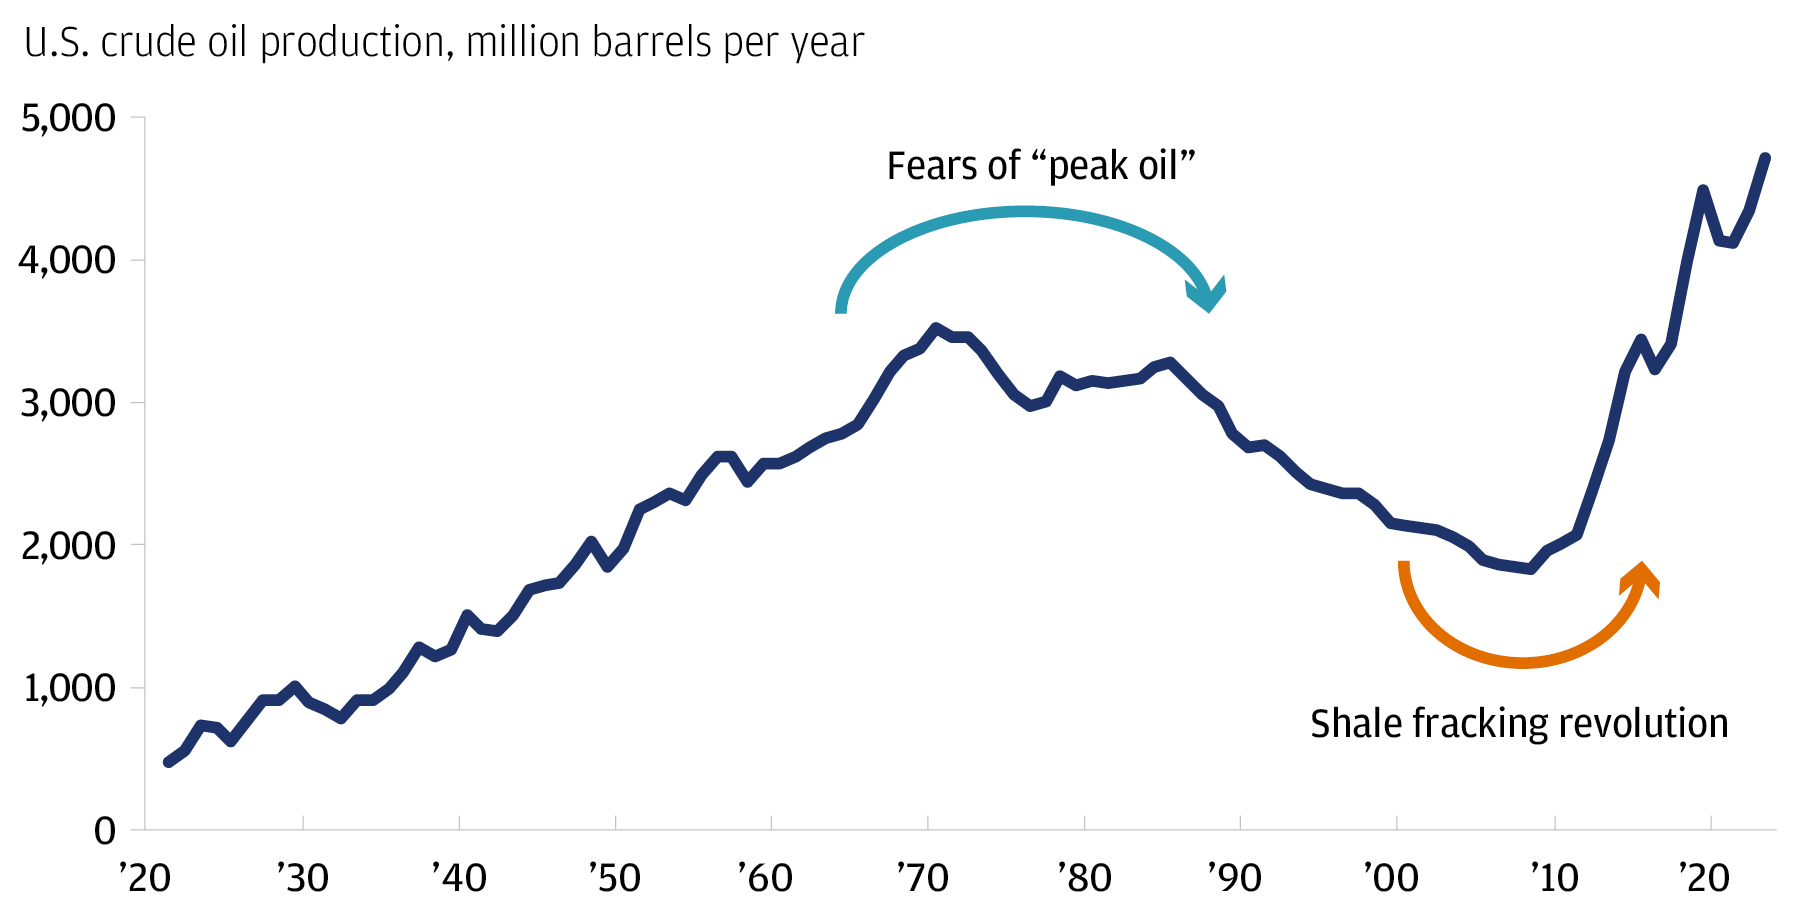 The chart describes U.S. field production of crude oil, million barrels per year